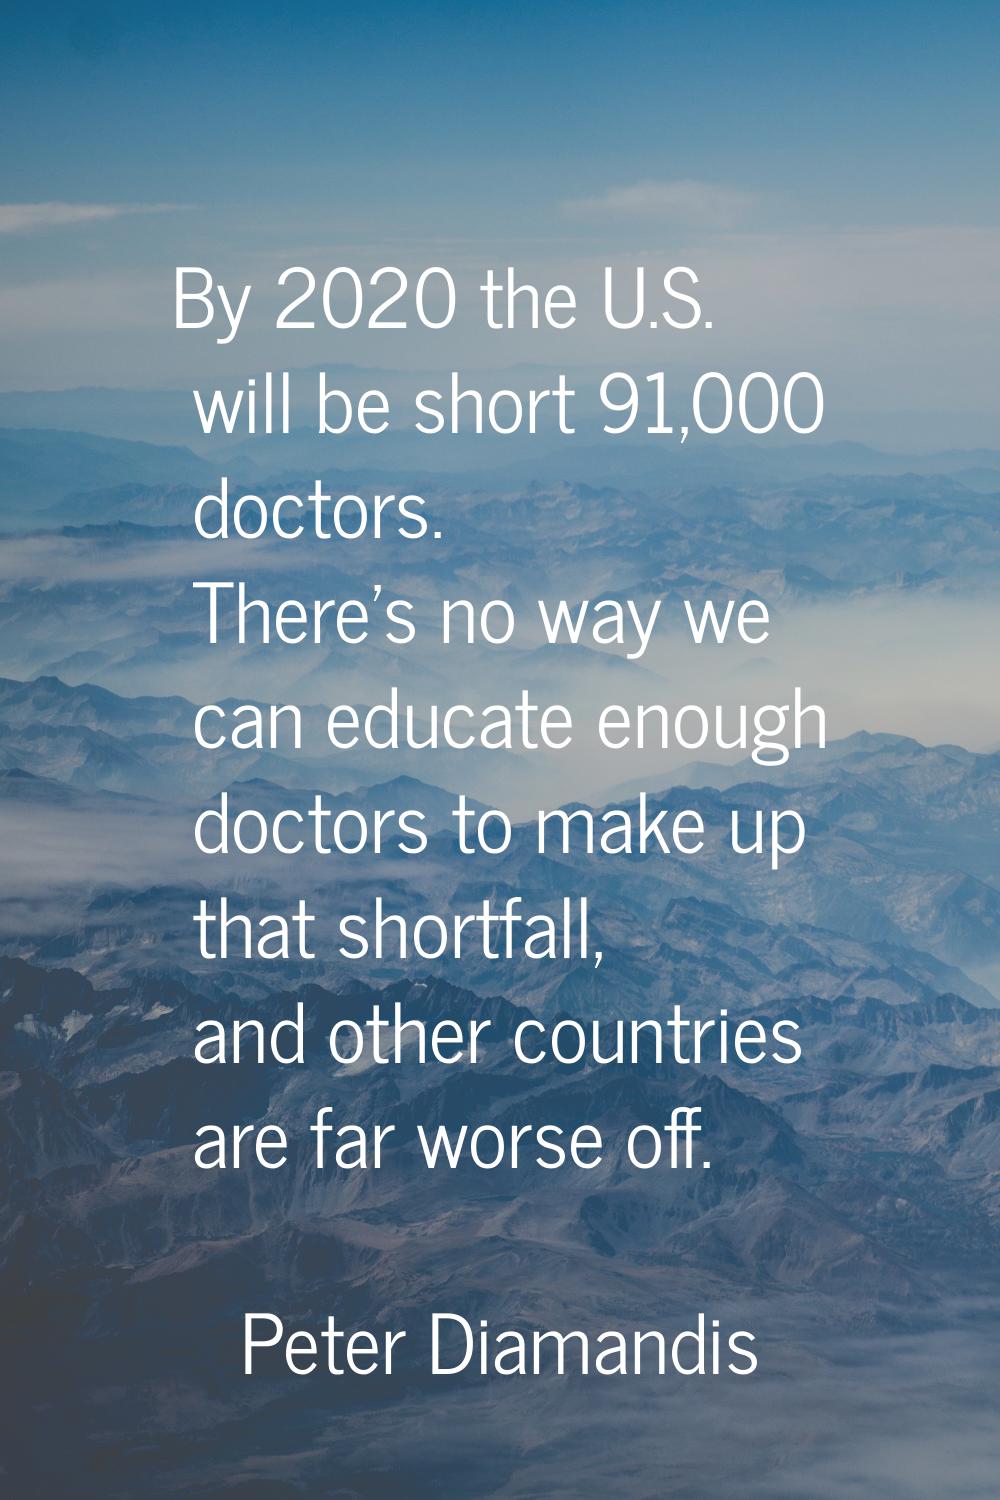 By 2020 the U.S. will be short 91,000 doctors. There's no way we can educate enough doctors to make